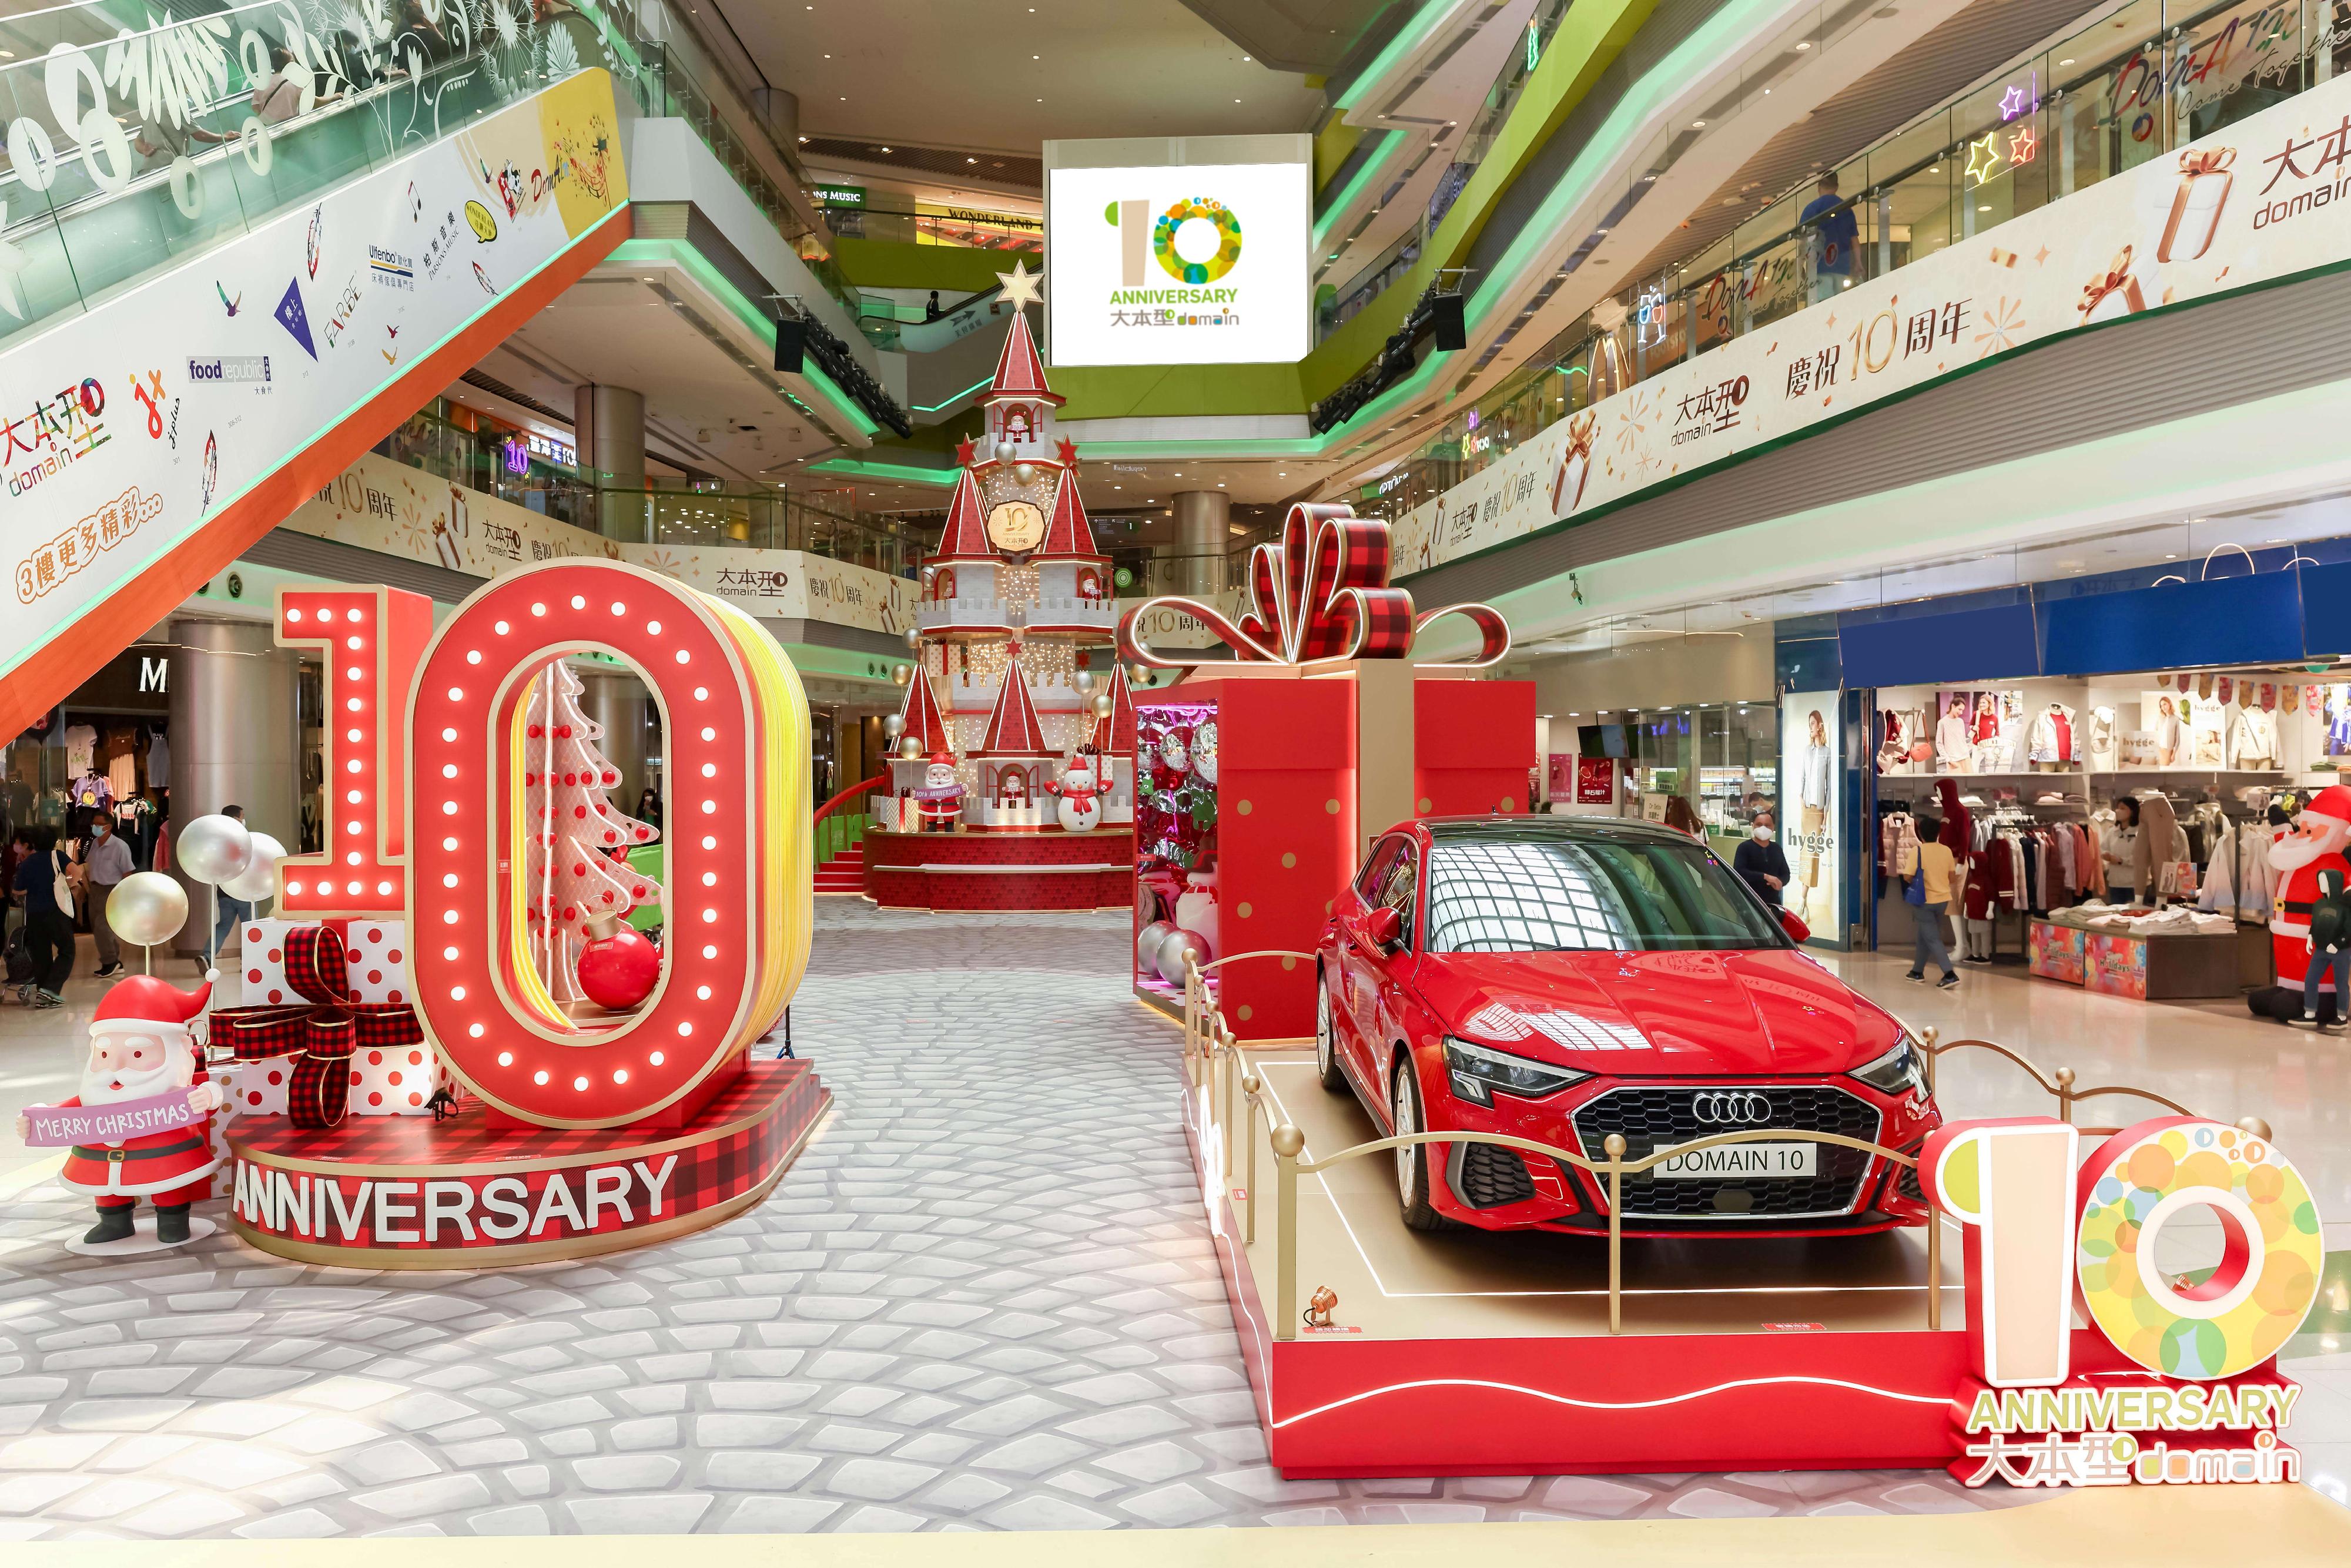 The Hong Kong Housing Authority (HA) today (November 25) held the "Domain 10th Anniversary Celebration cum Glamorous and Shining Christmas" event at its Domain shopping mall in Yau Tong. Photo shows Domain, the HA's flagship shopping mall in Yau Tong, displaying large-scale decorations this year to celebrate its 10th anniversary and the joy of Christmas.